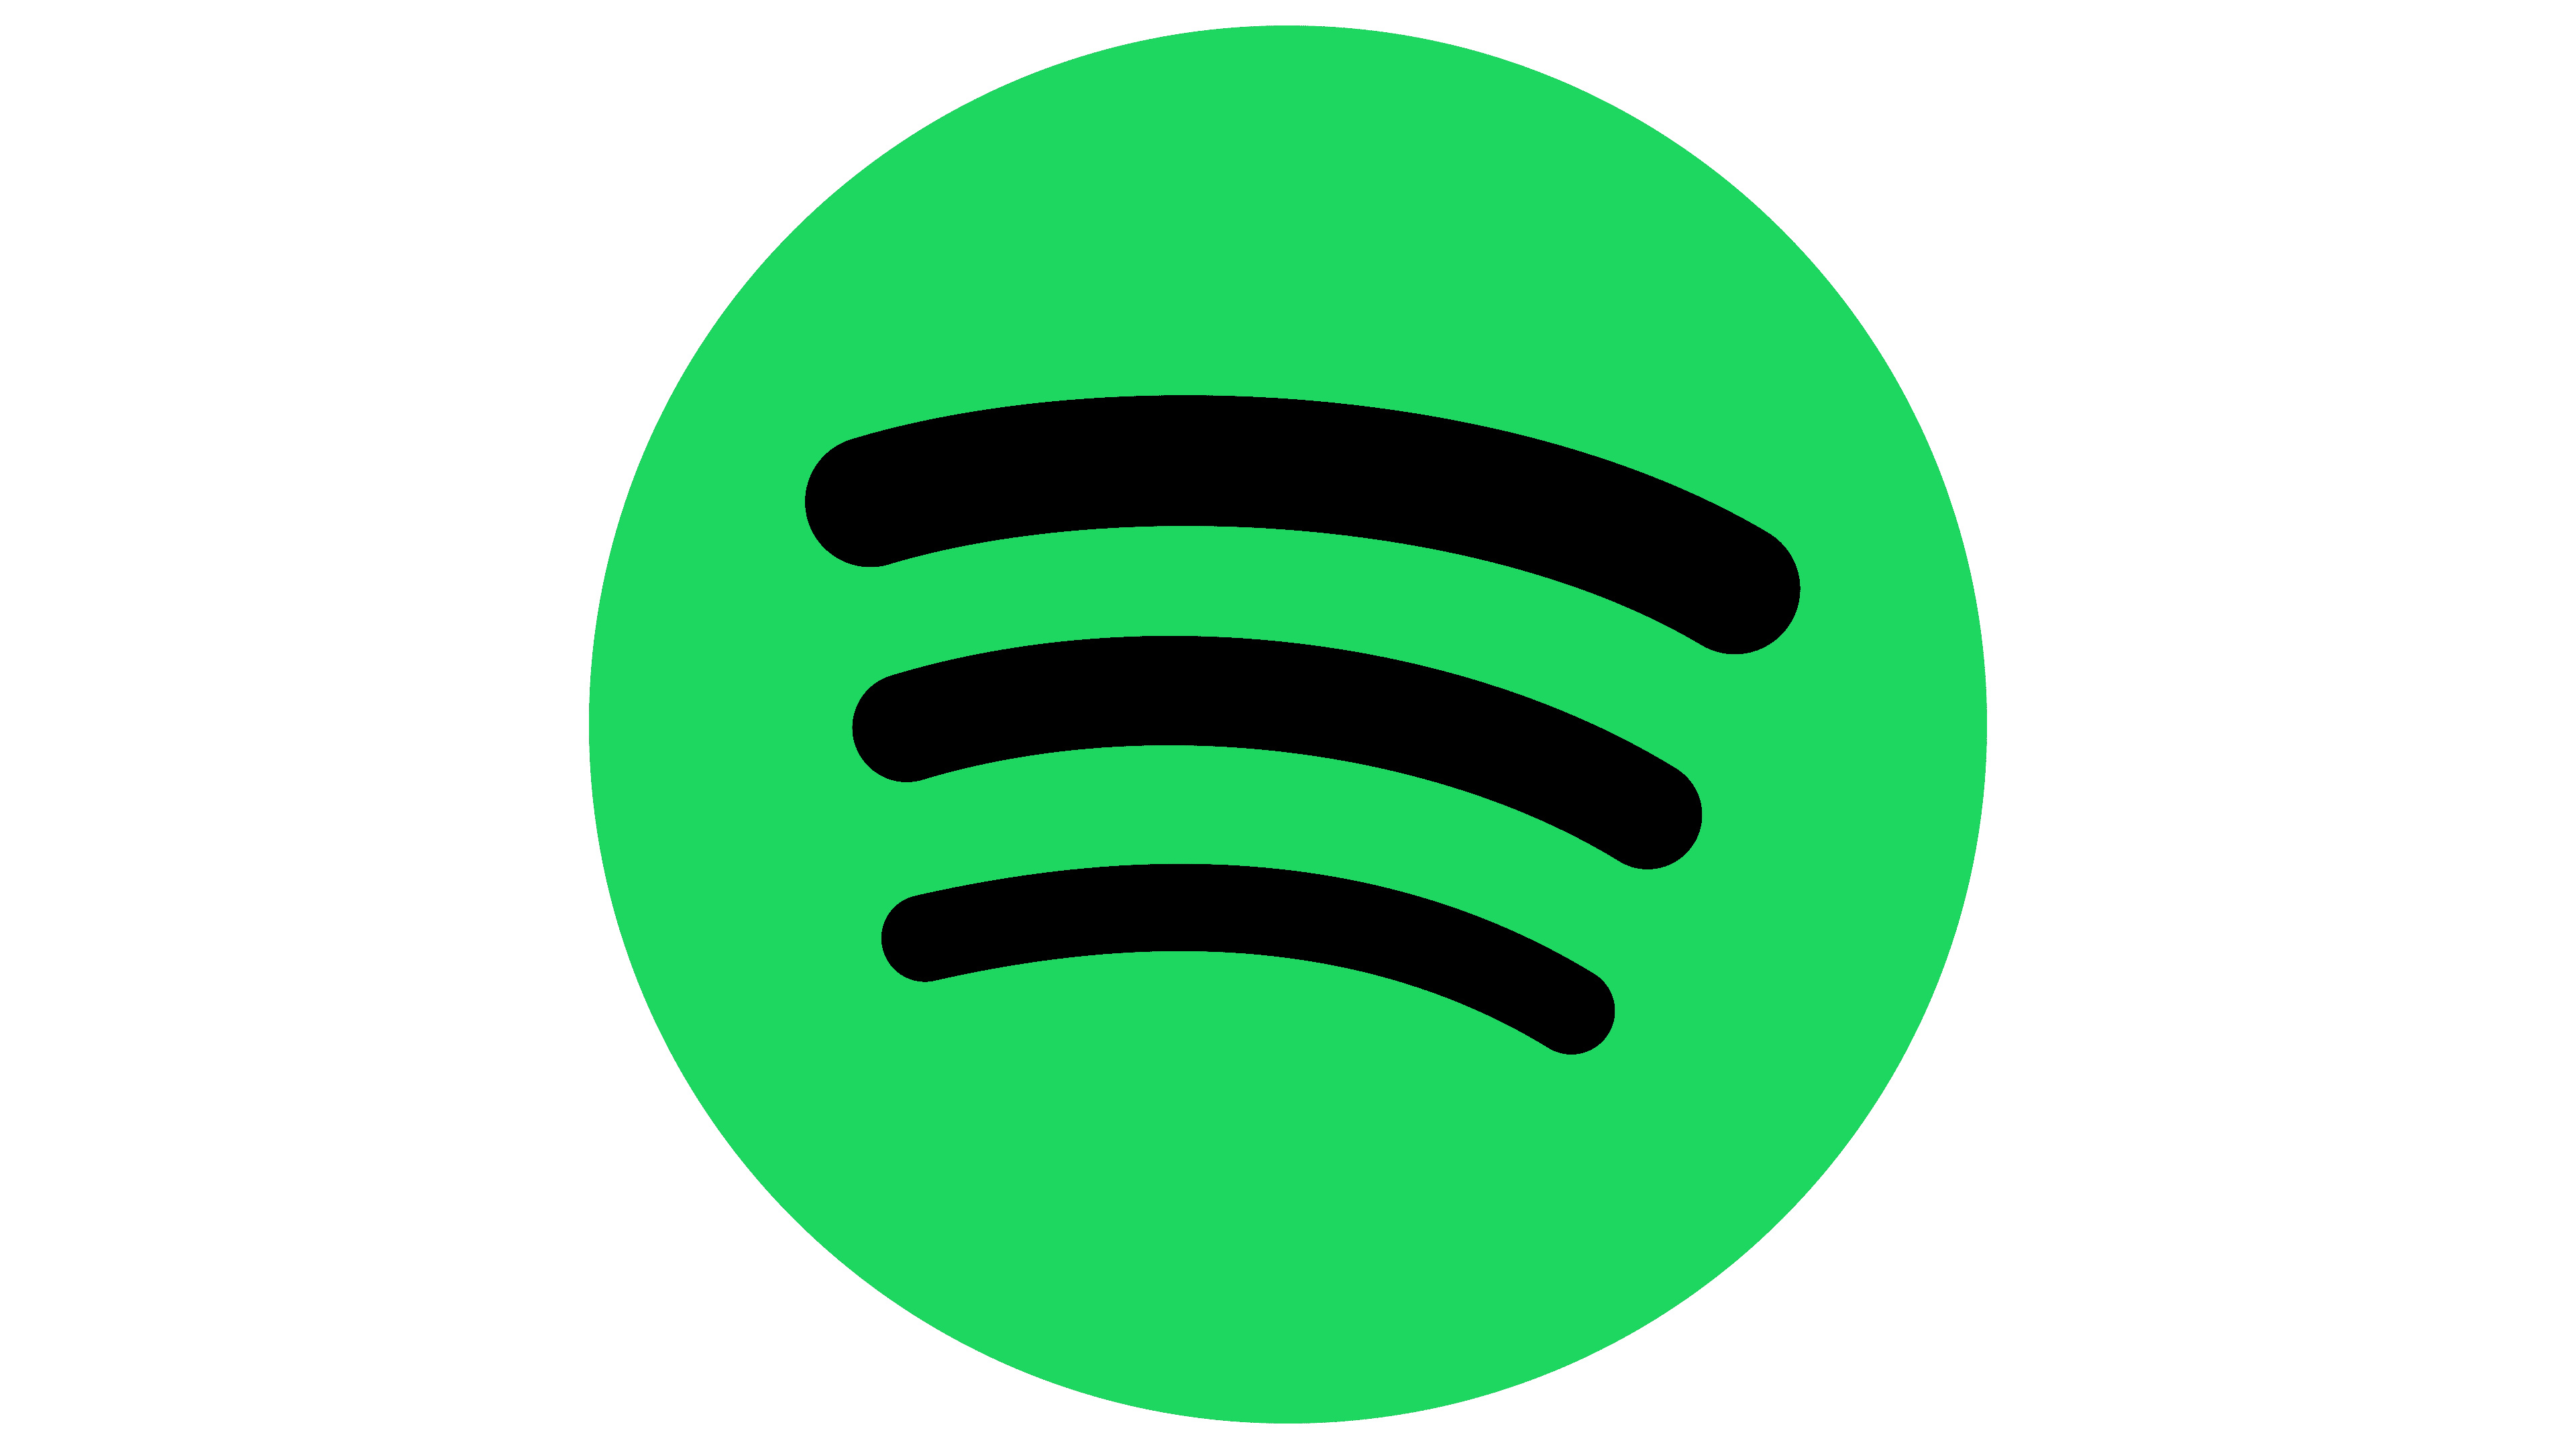 Spotify: Original logo with three lines representing musical energy or waves, Minimalistic. 3840x2160 4K Background.